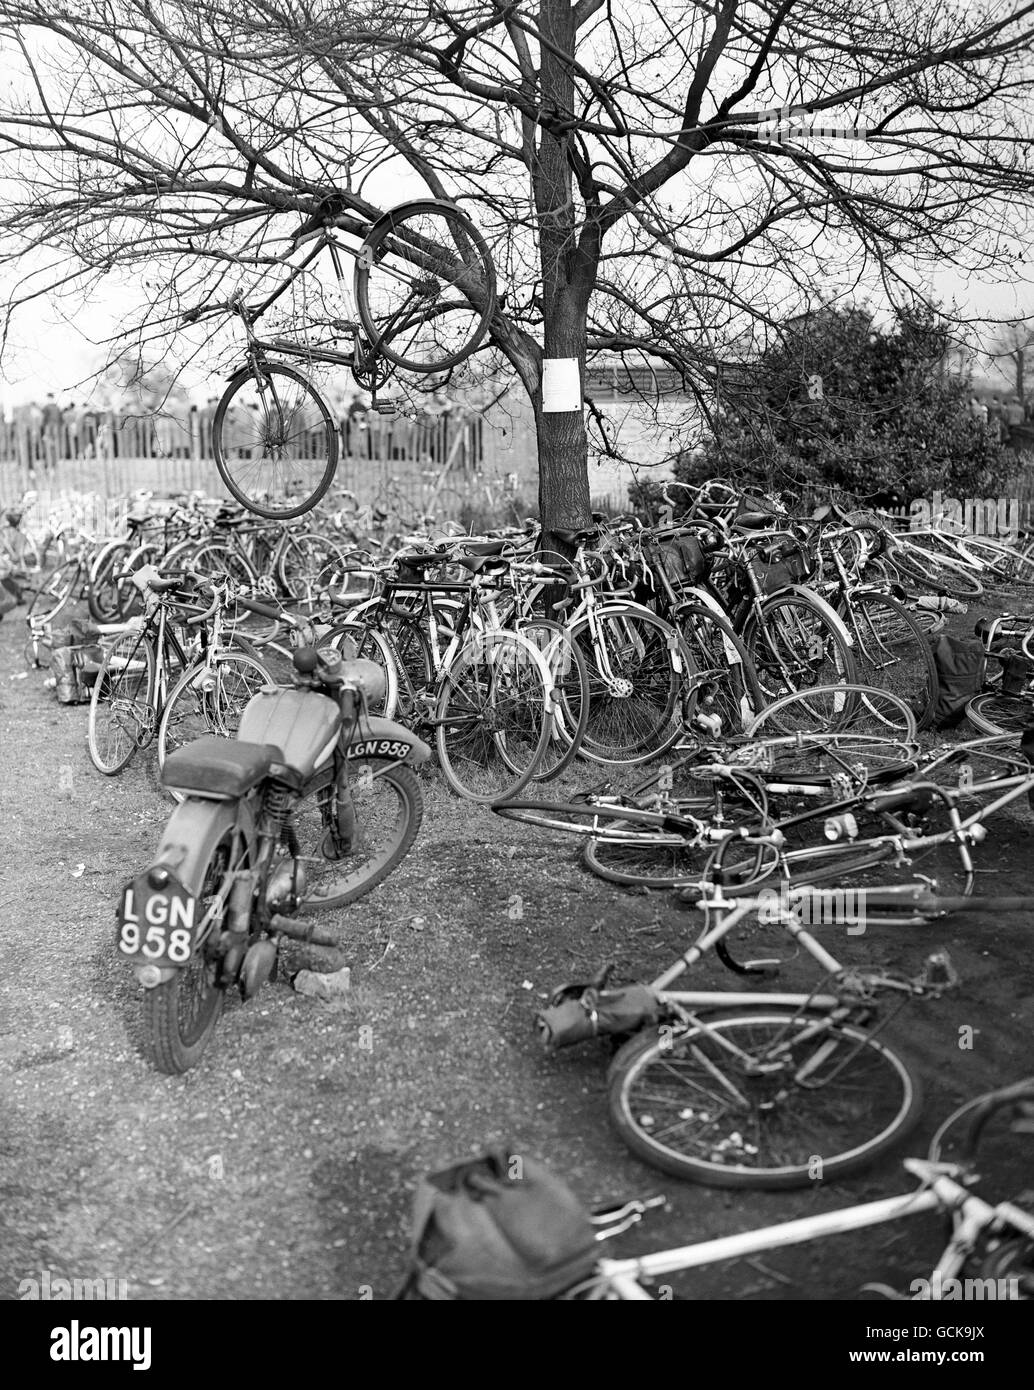 So that they could find their bicycle with ease from amongst so many, they hung the cycle from a tree branch at the Southern Counties Cycling Union's annual Good Friday meeting at Herne Hill, London. Stock Photo